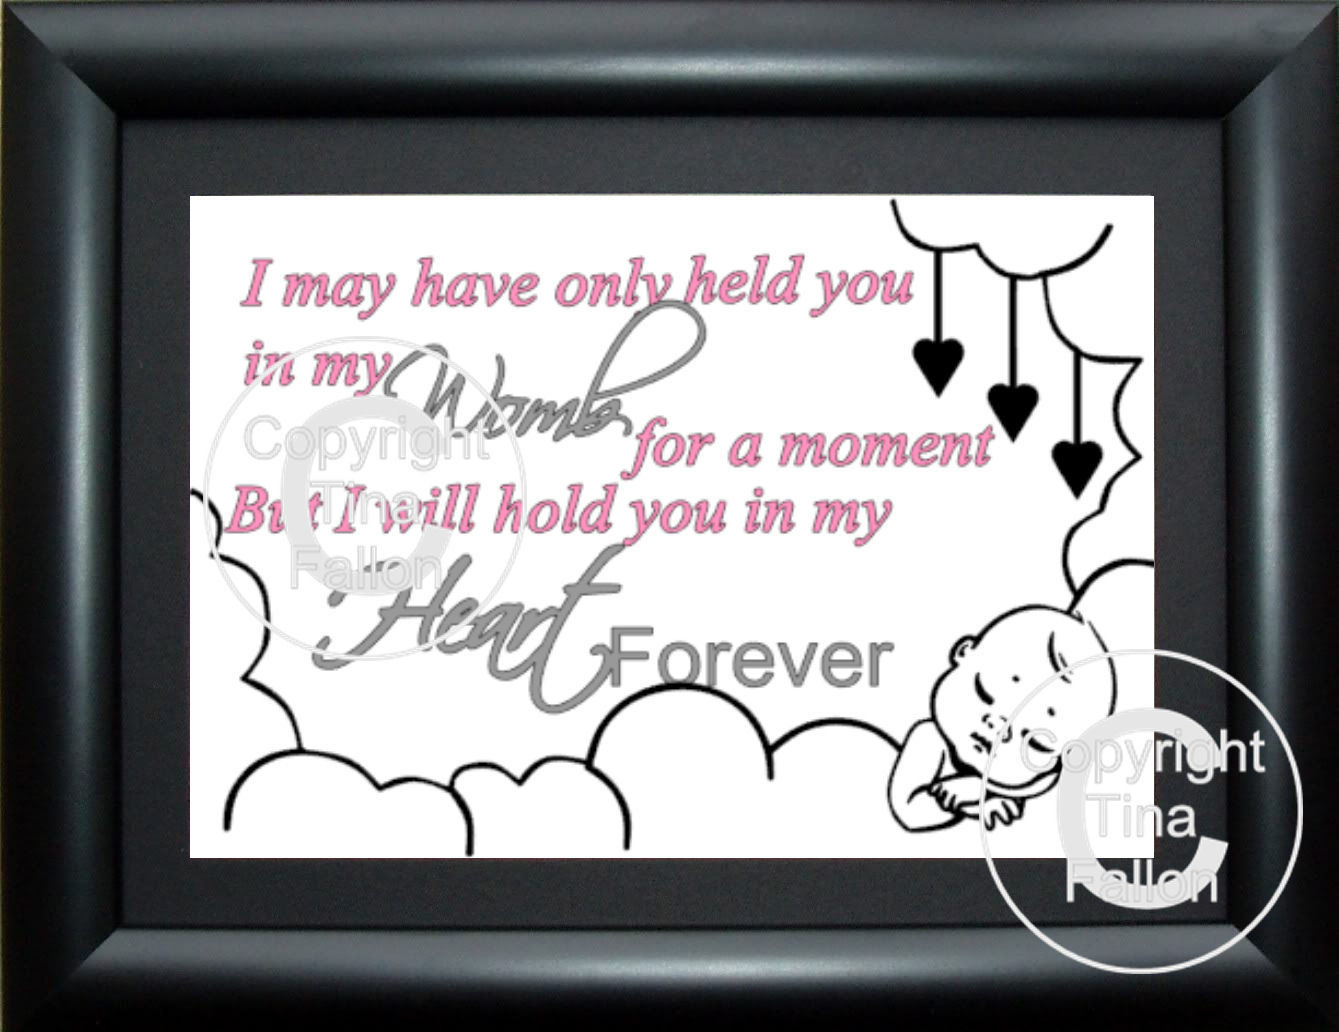 I May Have Only held you in my womb for a moment (for a landscape frame) studio format